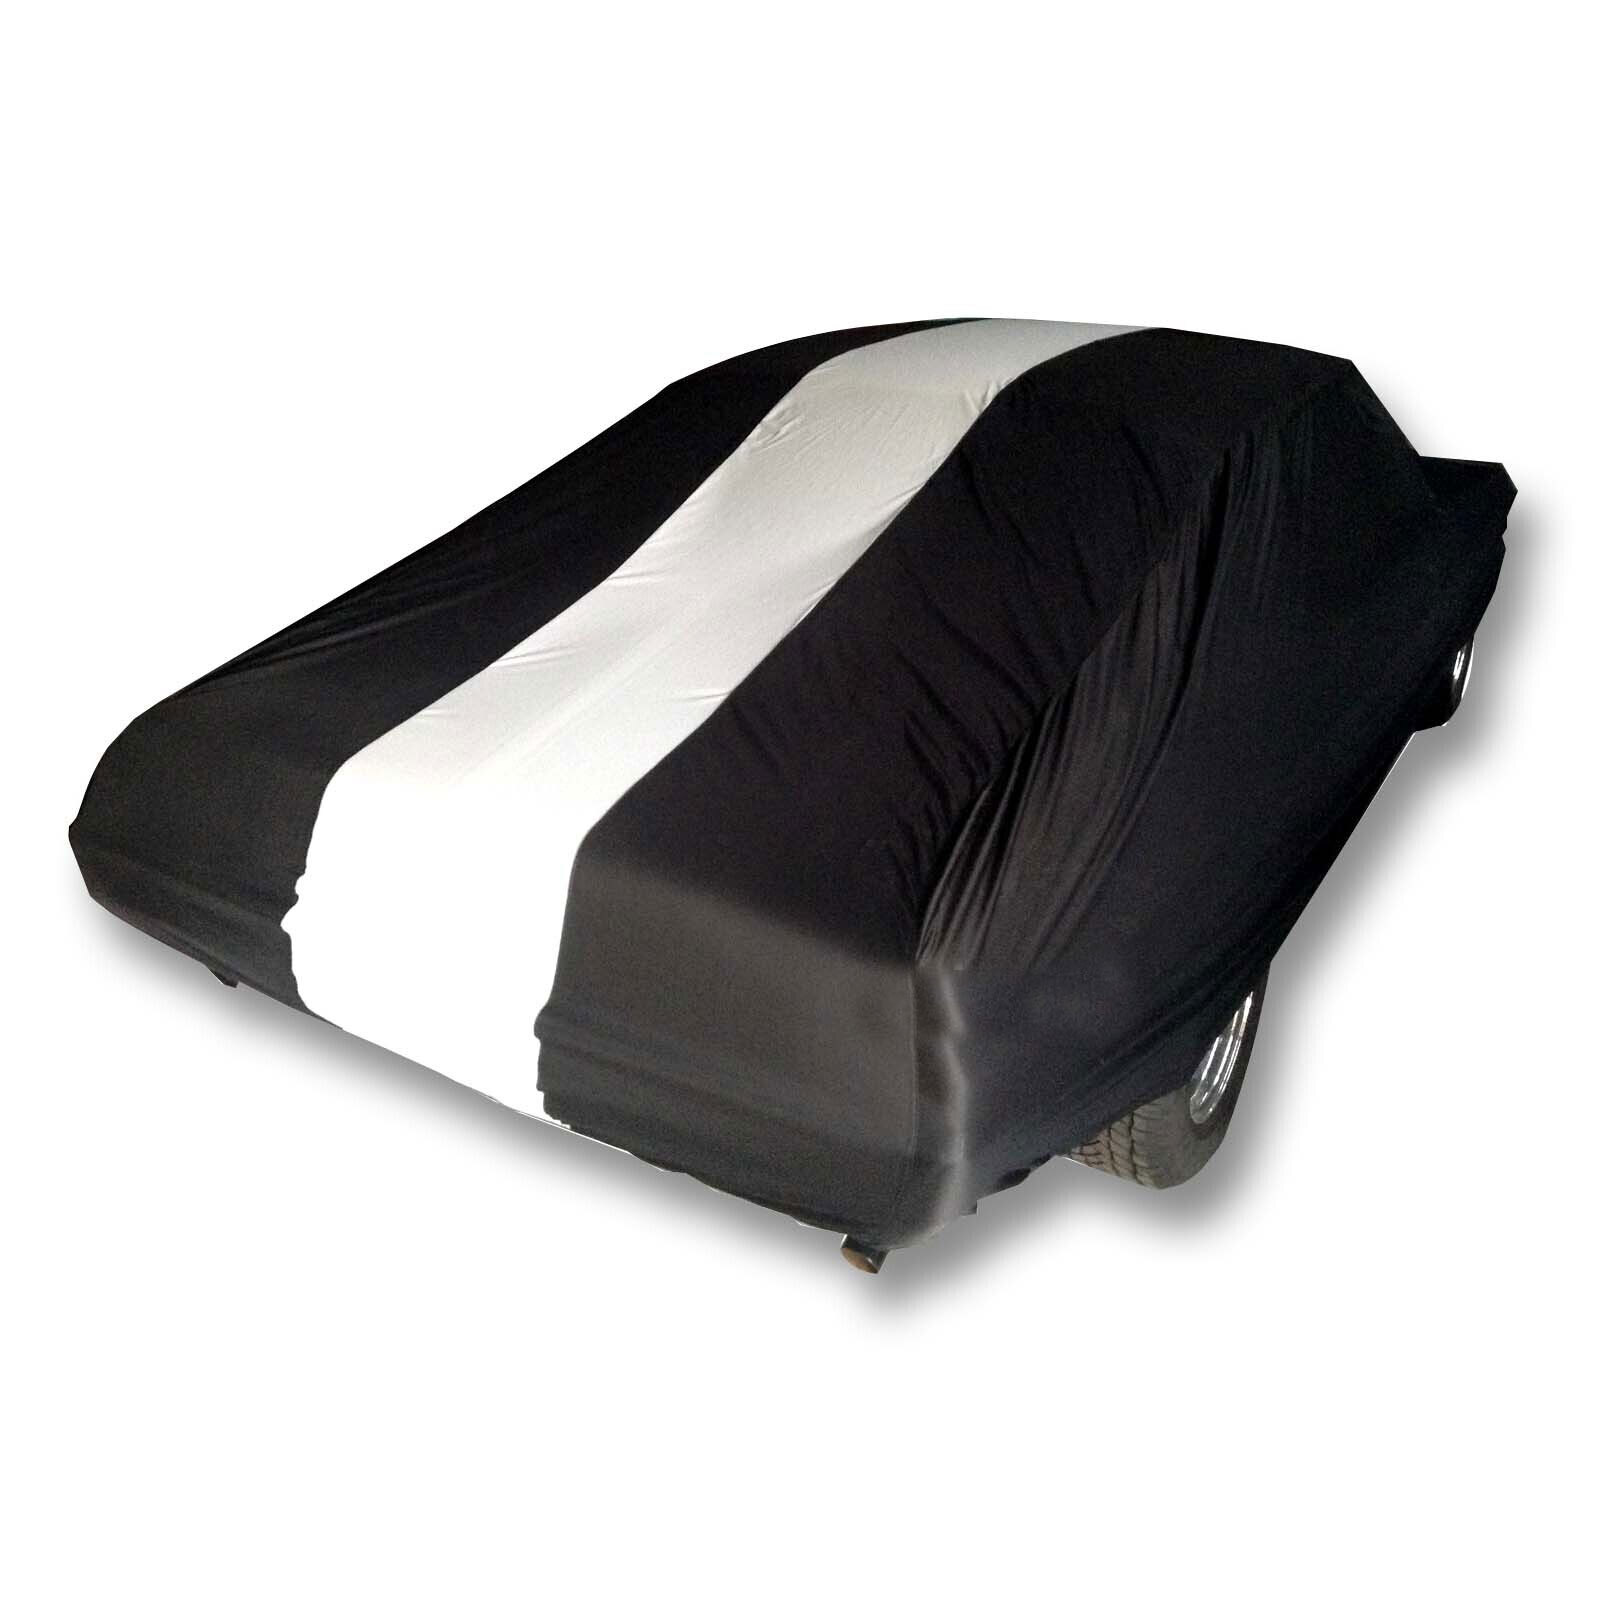 Show Car Cover Racing Stripe Black Indoor 2015 2016 2017 2018 2019 Ford Mustang eBay